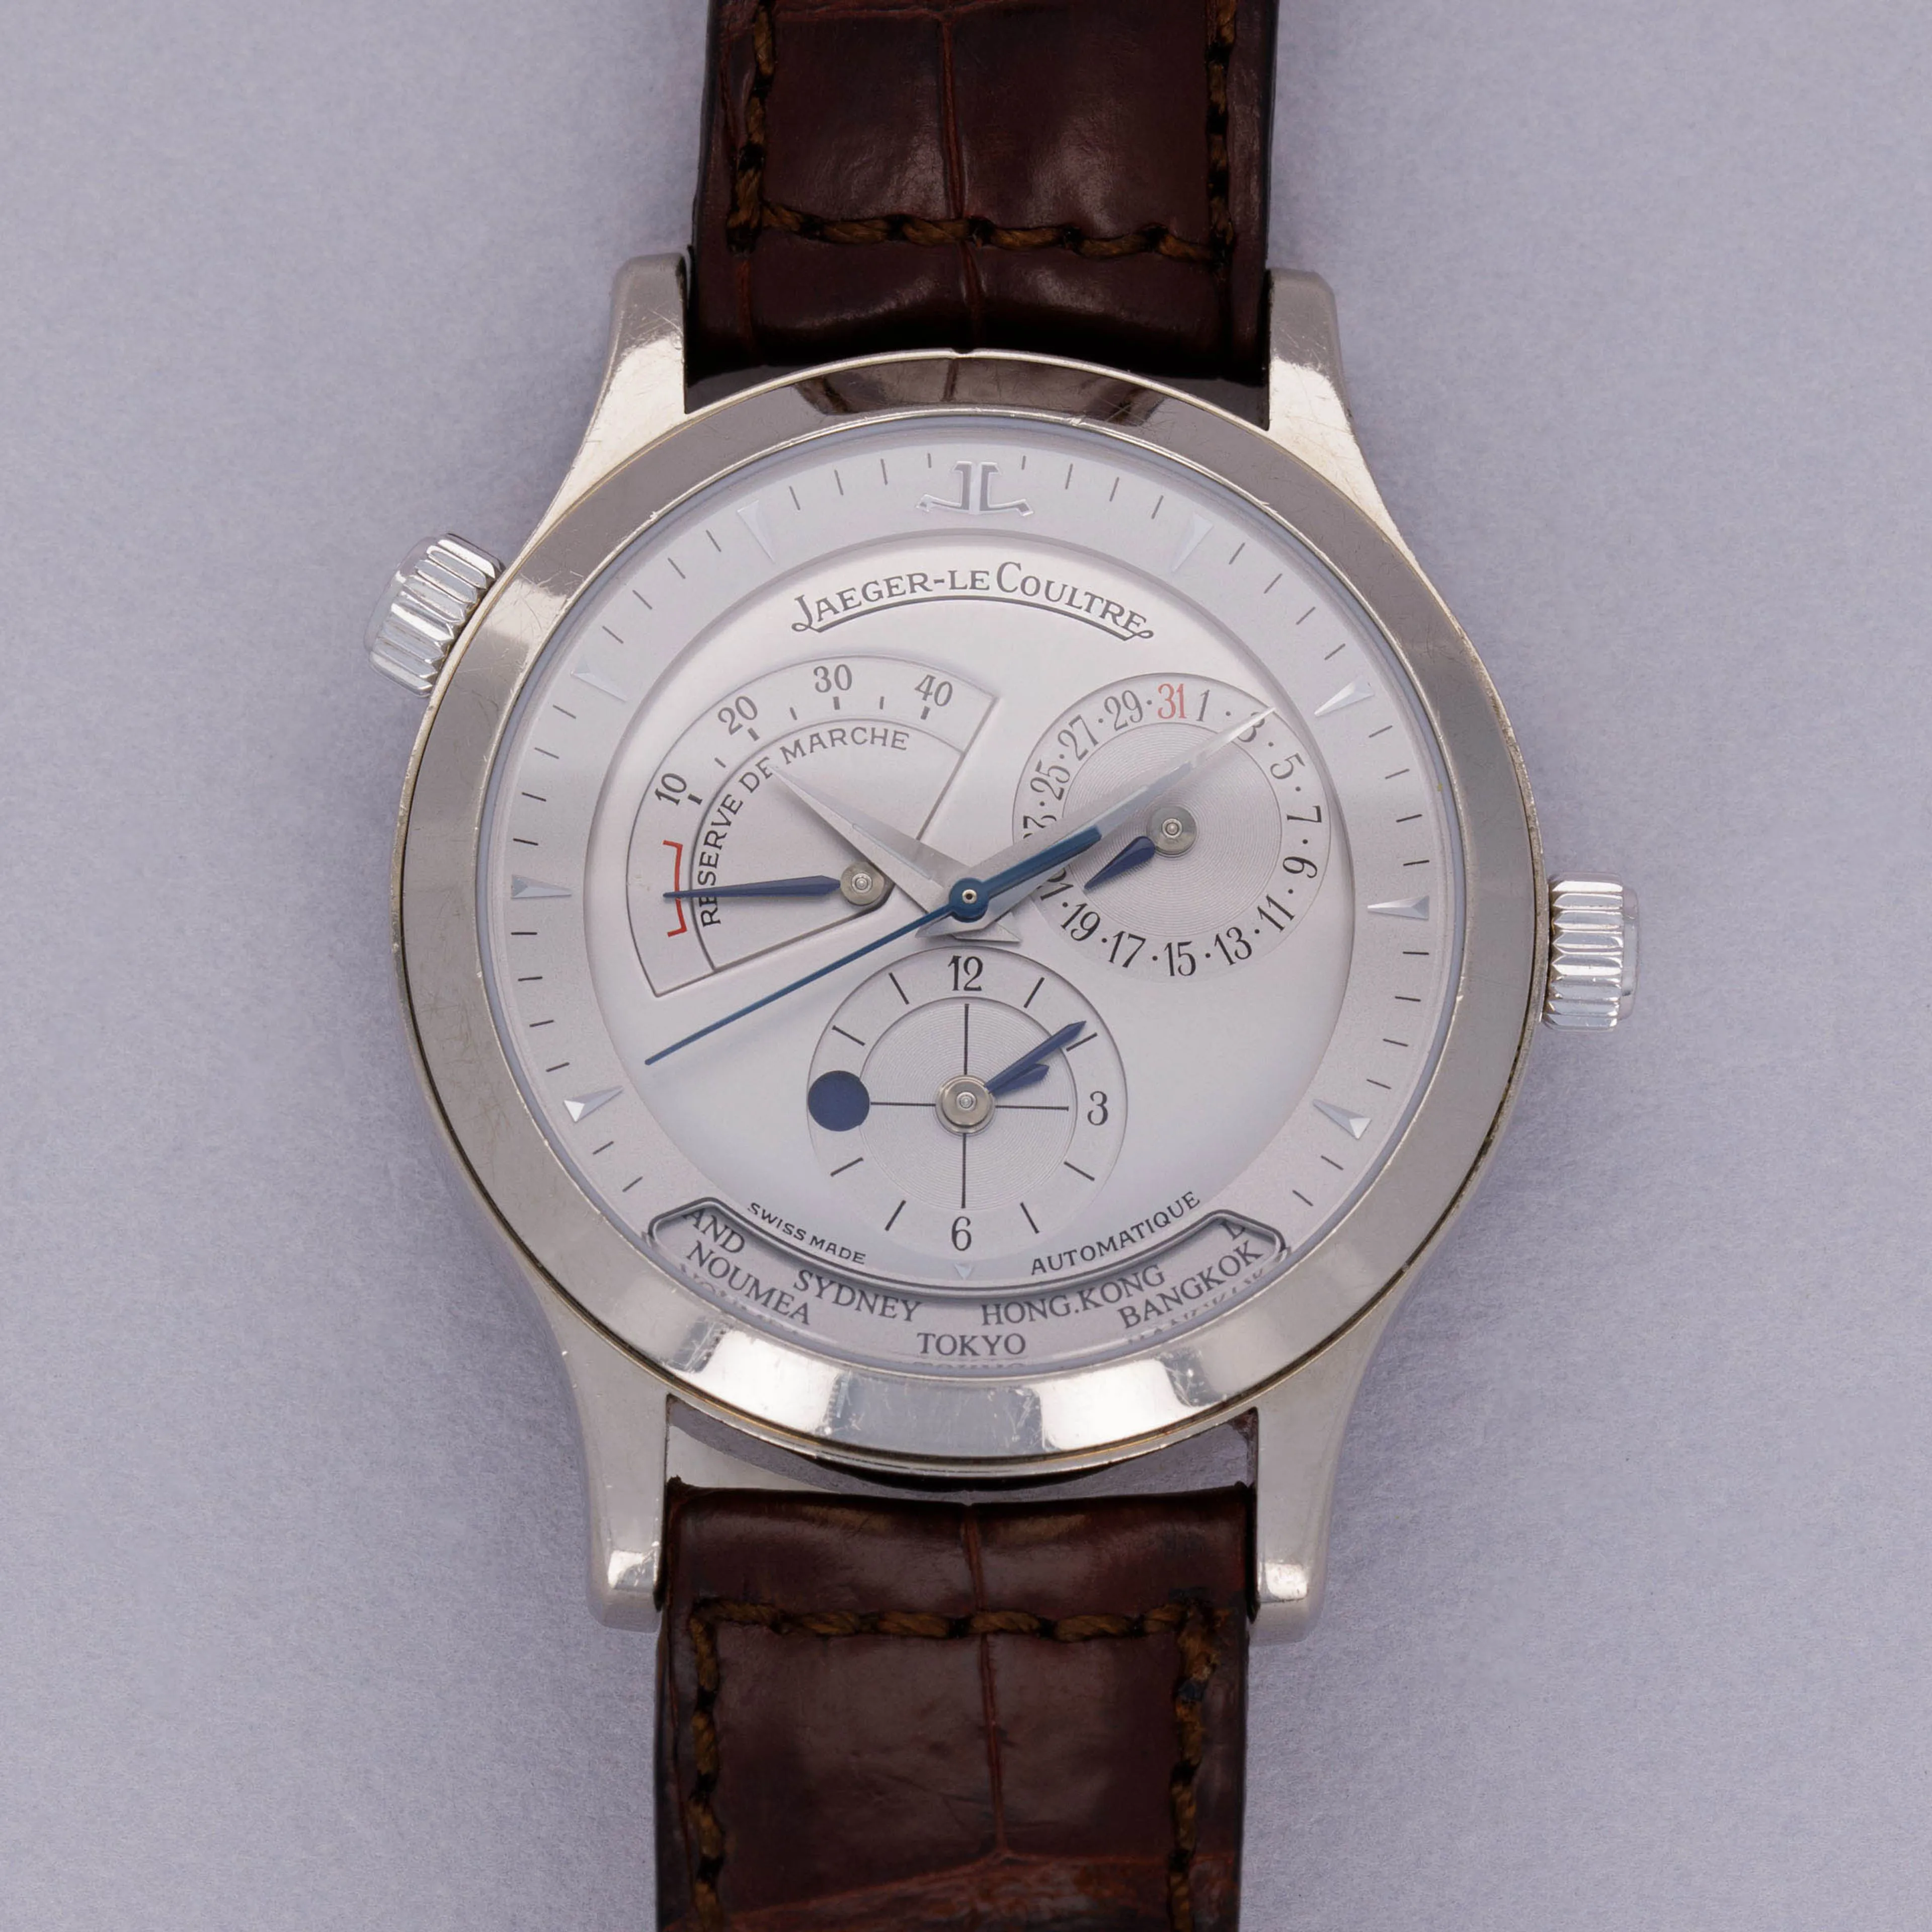 Jaeger-LeCoultre Master Geographic 142.3.92 nullmm